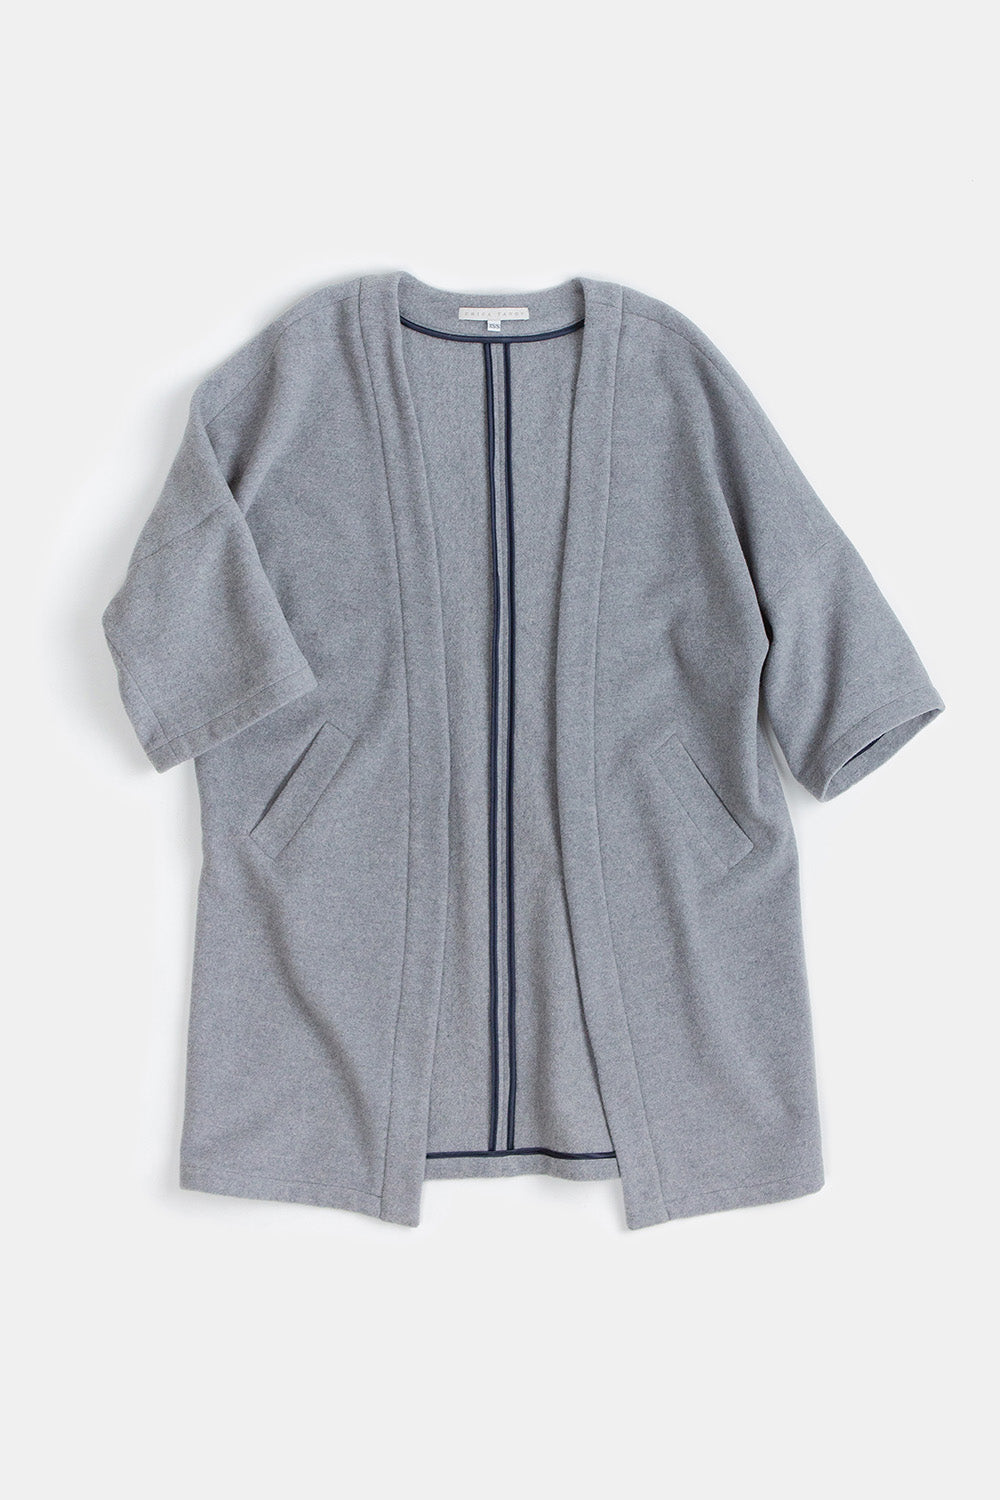 Clyde Cashmere Wool Coat in Light Grey